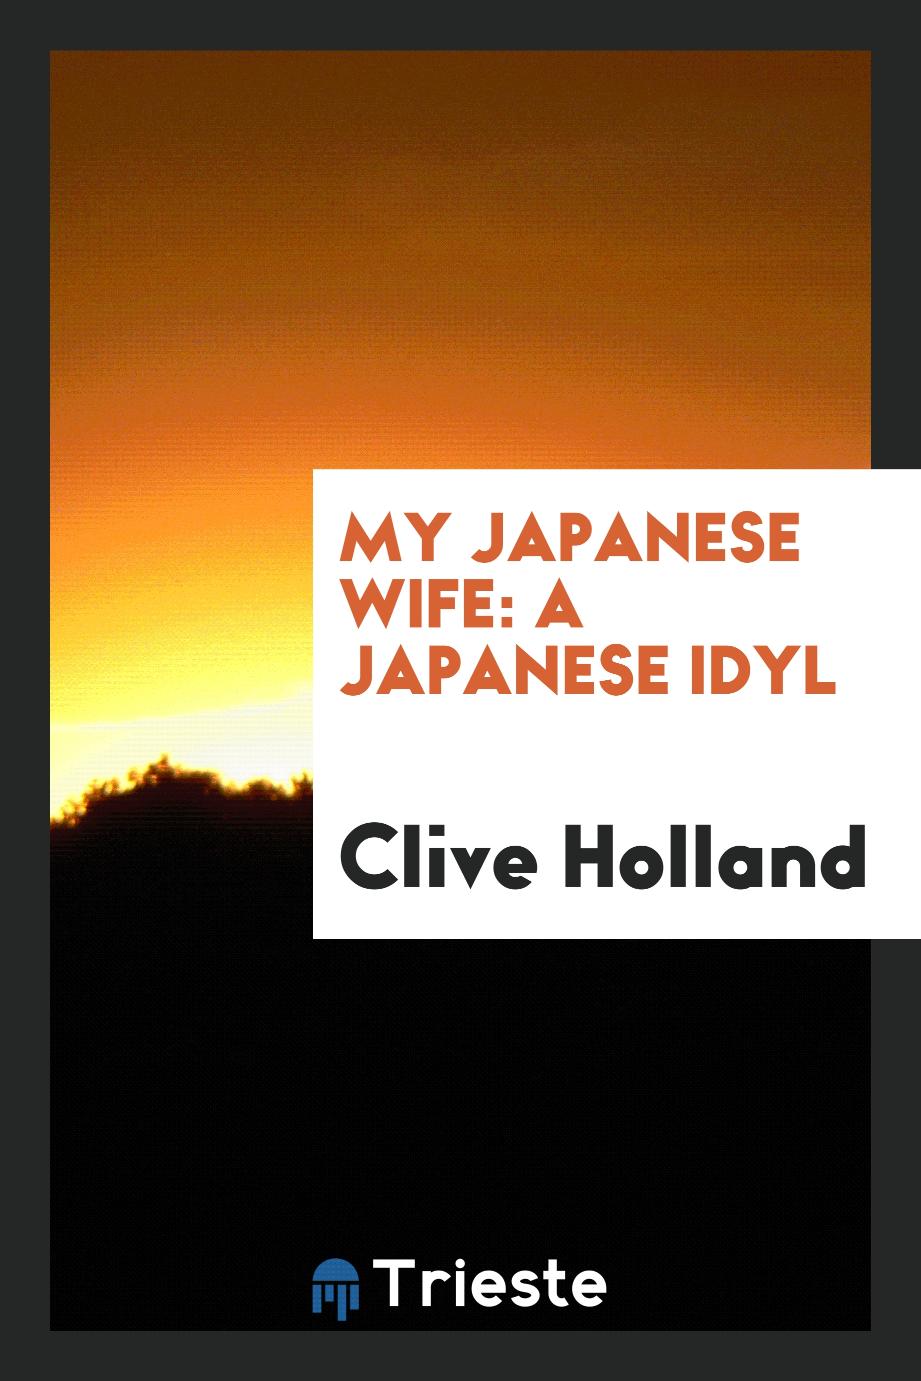 My Japanese wife: a Japanese idyl - Clive Holland